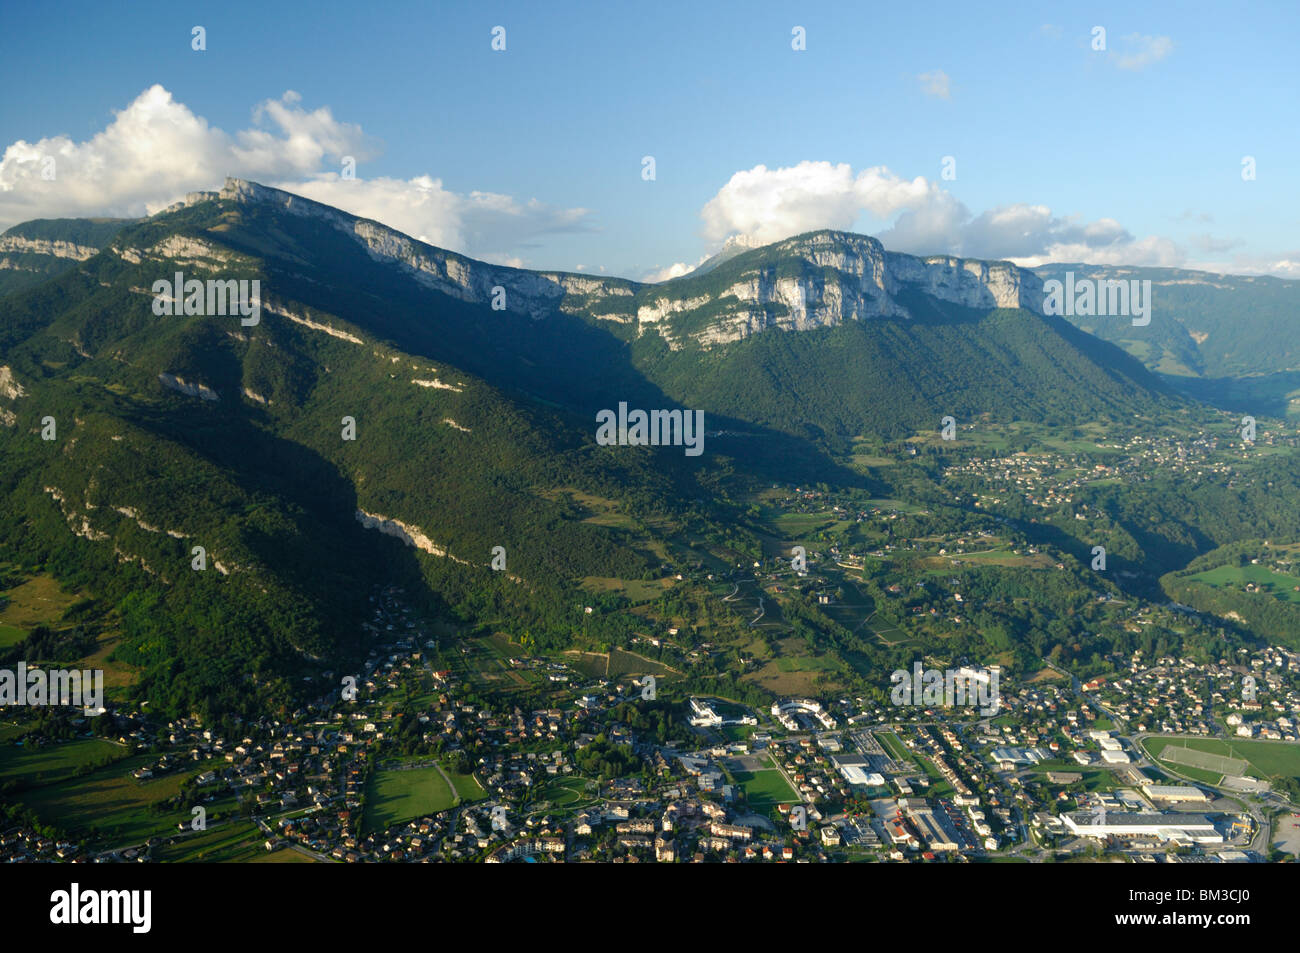 Aerial view of Saint Alban Leysse village and Mounts Nivolet and Peney. Savoy (Savoie), Rhone-Alpes region, French Alps, France Stock Photo